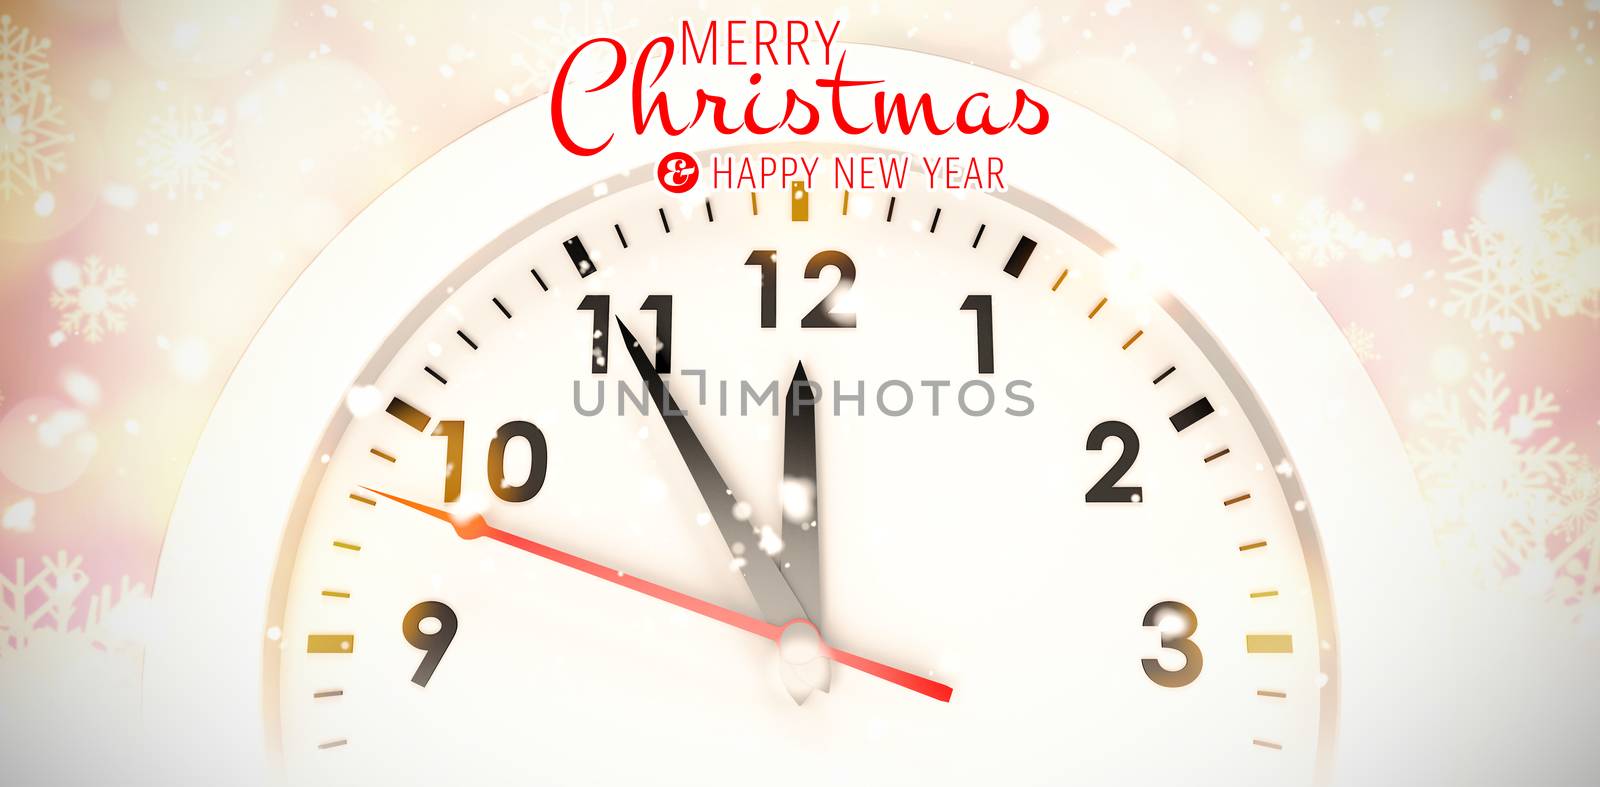 Composite image of merry christmas message by Wavebreakmedia